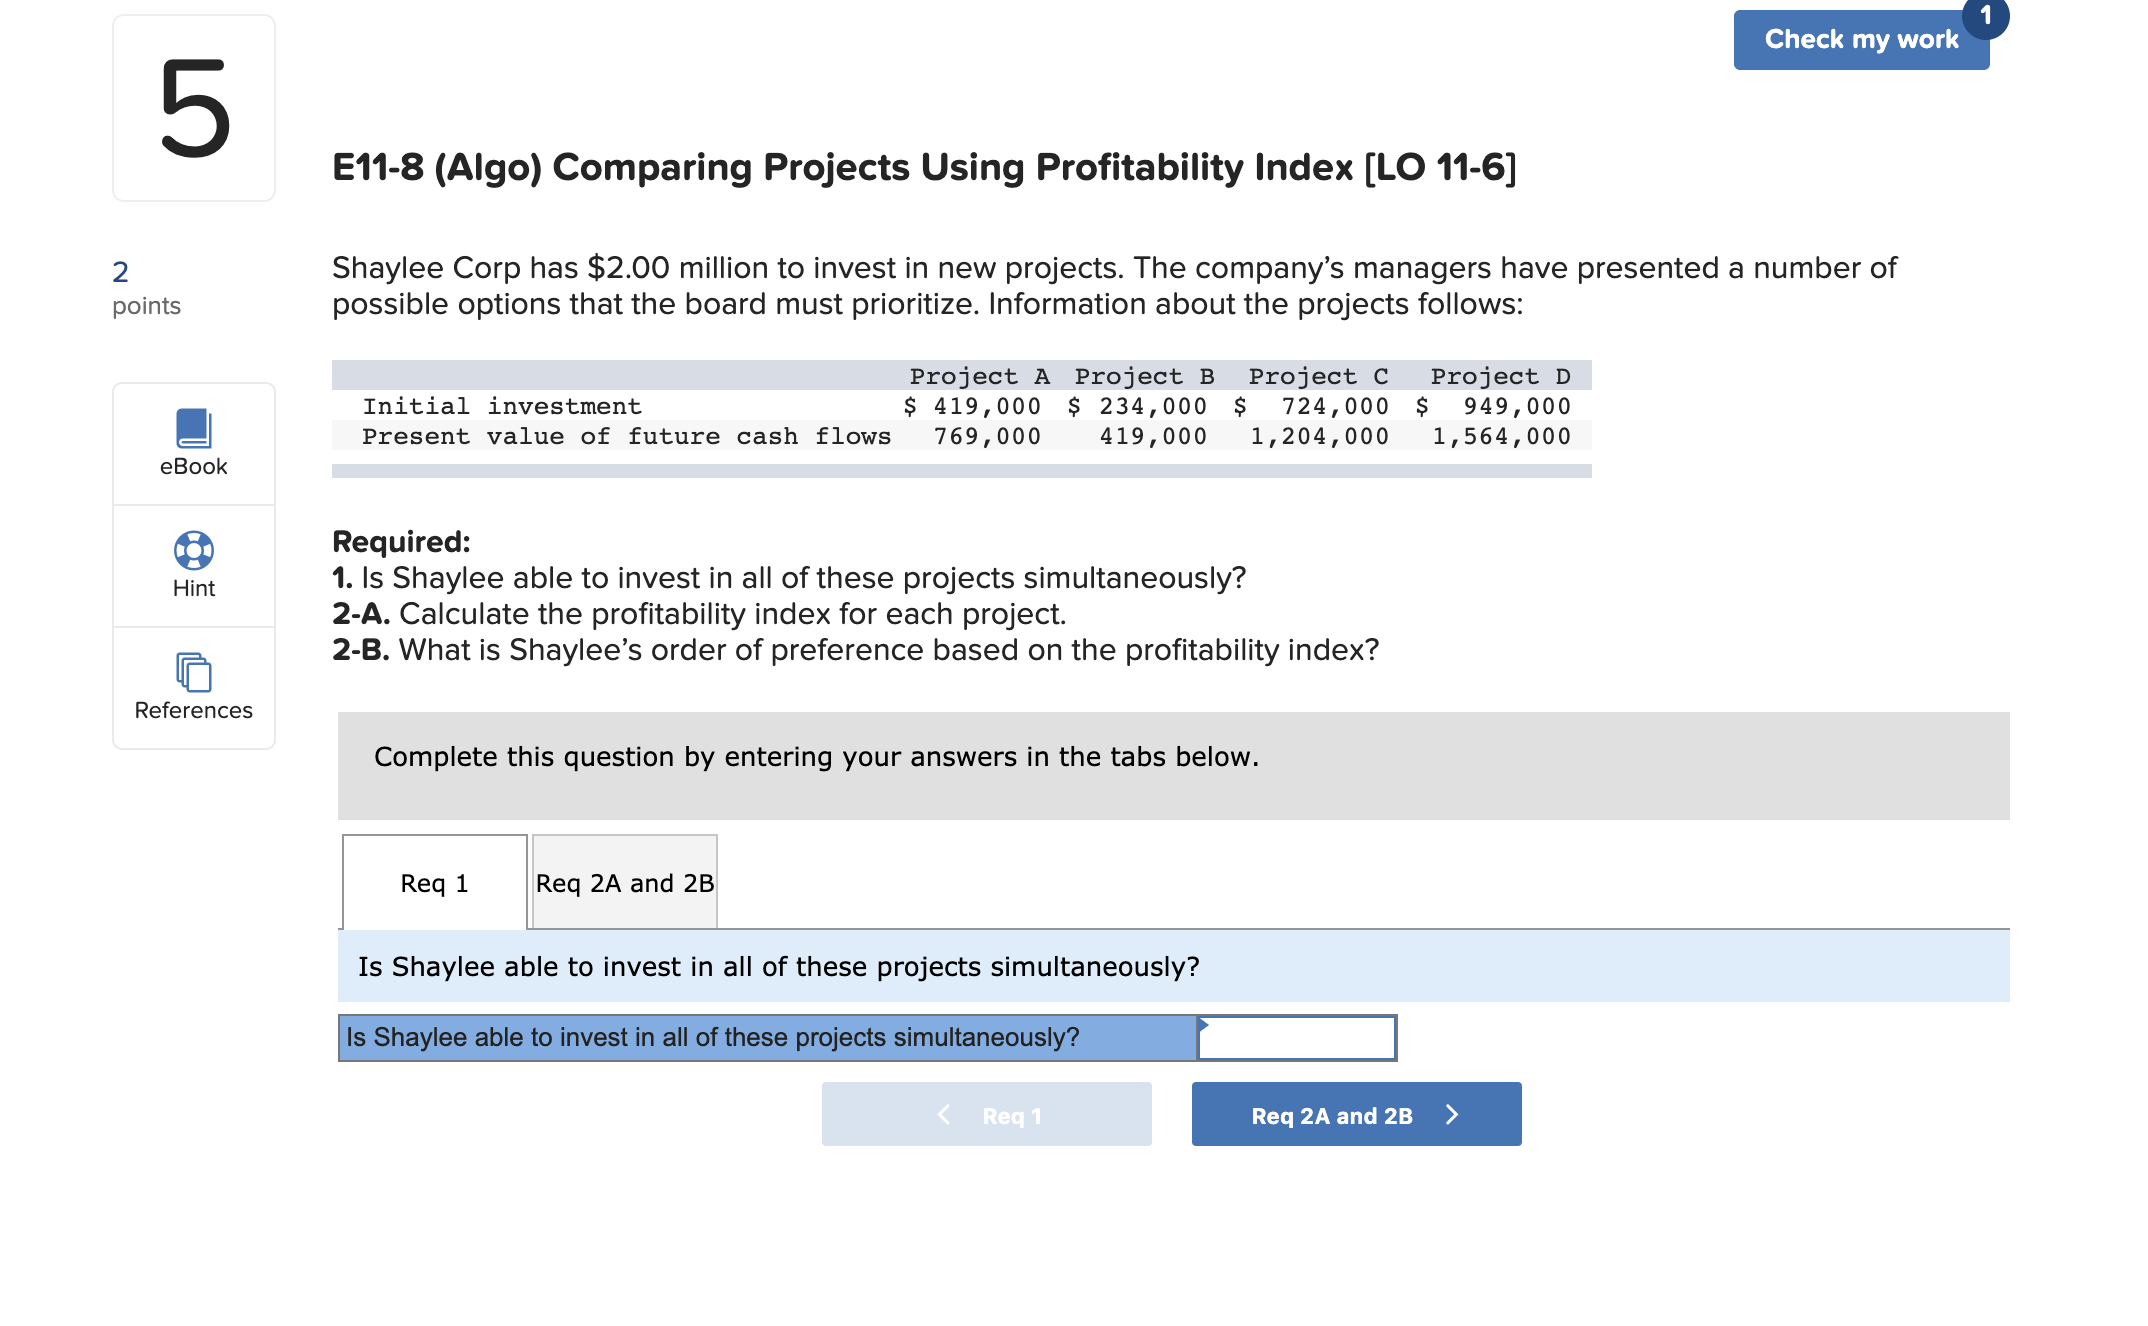 Check my work
E11-8 (Algo) Comparing Projects Using Profitability Index [LO 11-6]
Shaylee Corp has $2.00 million to invest in new projects. The company's managers have presented a number of
possible options that the board must prioritize. Information about the projects follows:
points
Project A Project B
$ 419,000 $ 234,000 $
769,000
Project C
724,000 $
1,204,000
Project D
949,000
1,564,000
Initial investment
Present value of future cash flows
419,000
eBook
Required:
1. Is Shaylee able to invest in all of these projects simultaneously?
2-A. Calculate the profitability index for each project.
2-B. What is Shaylee's order of preference based on the profitability index?
Hint
References
Complete this question by entering your answers in the tabs below.
Req 1
Req 2A and 2B
Is Shaylee able to invest in all of these projects simultaneously?
Is Shaylee able to invest in all of these projects simultaneously?
< Req 1
Req 2A and 2B >
